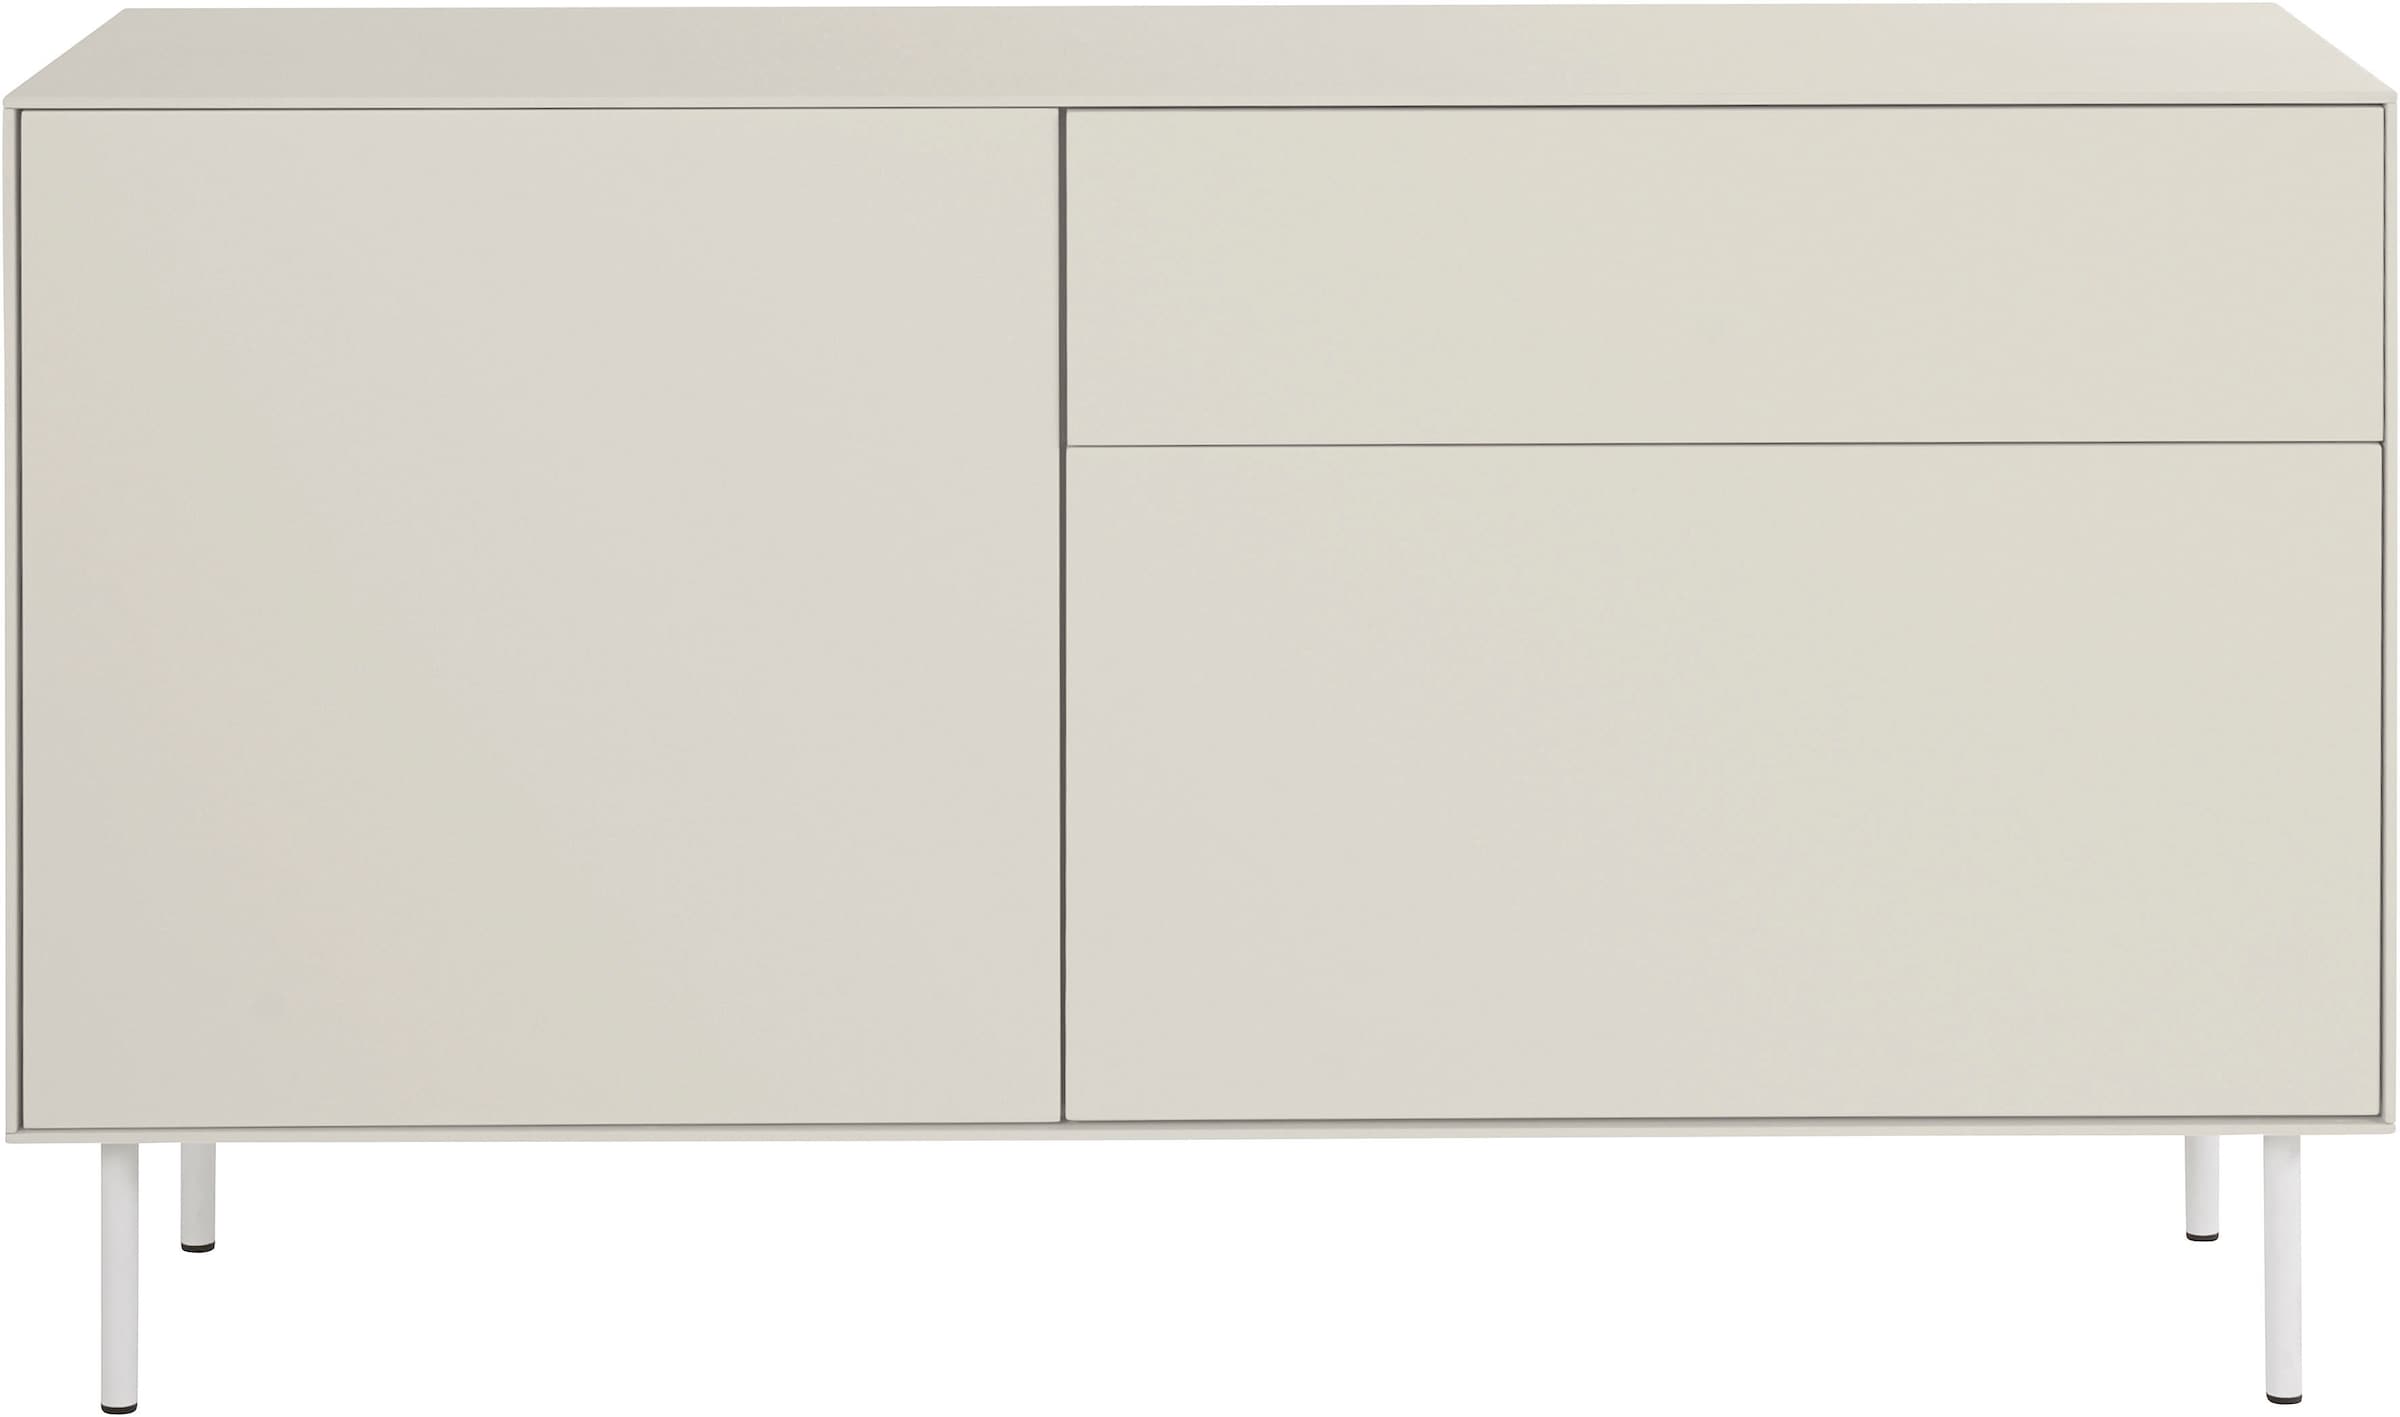 LeGer Home by Lena Gercke Lowboard »Essentials«, Breite: 127 cm, MDF lackiert, Push-to-open-Funktion